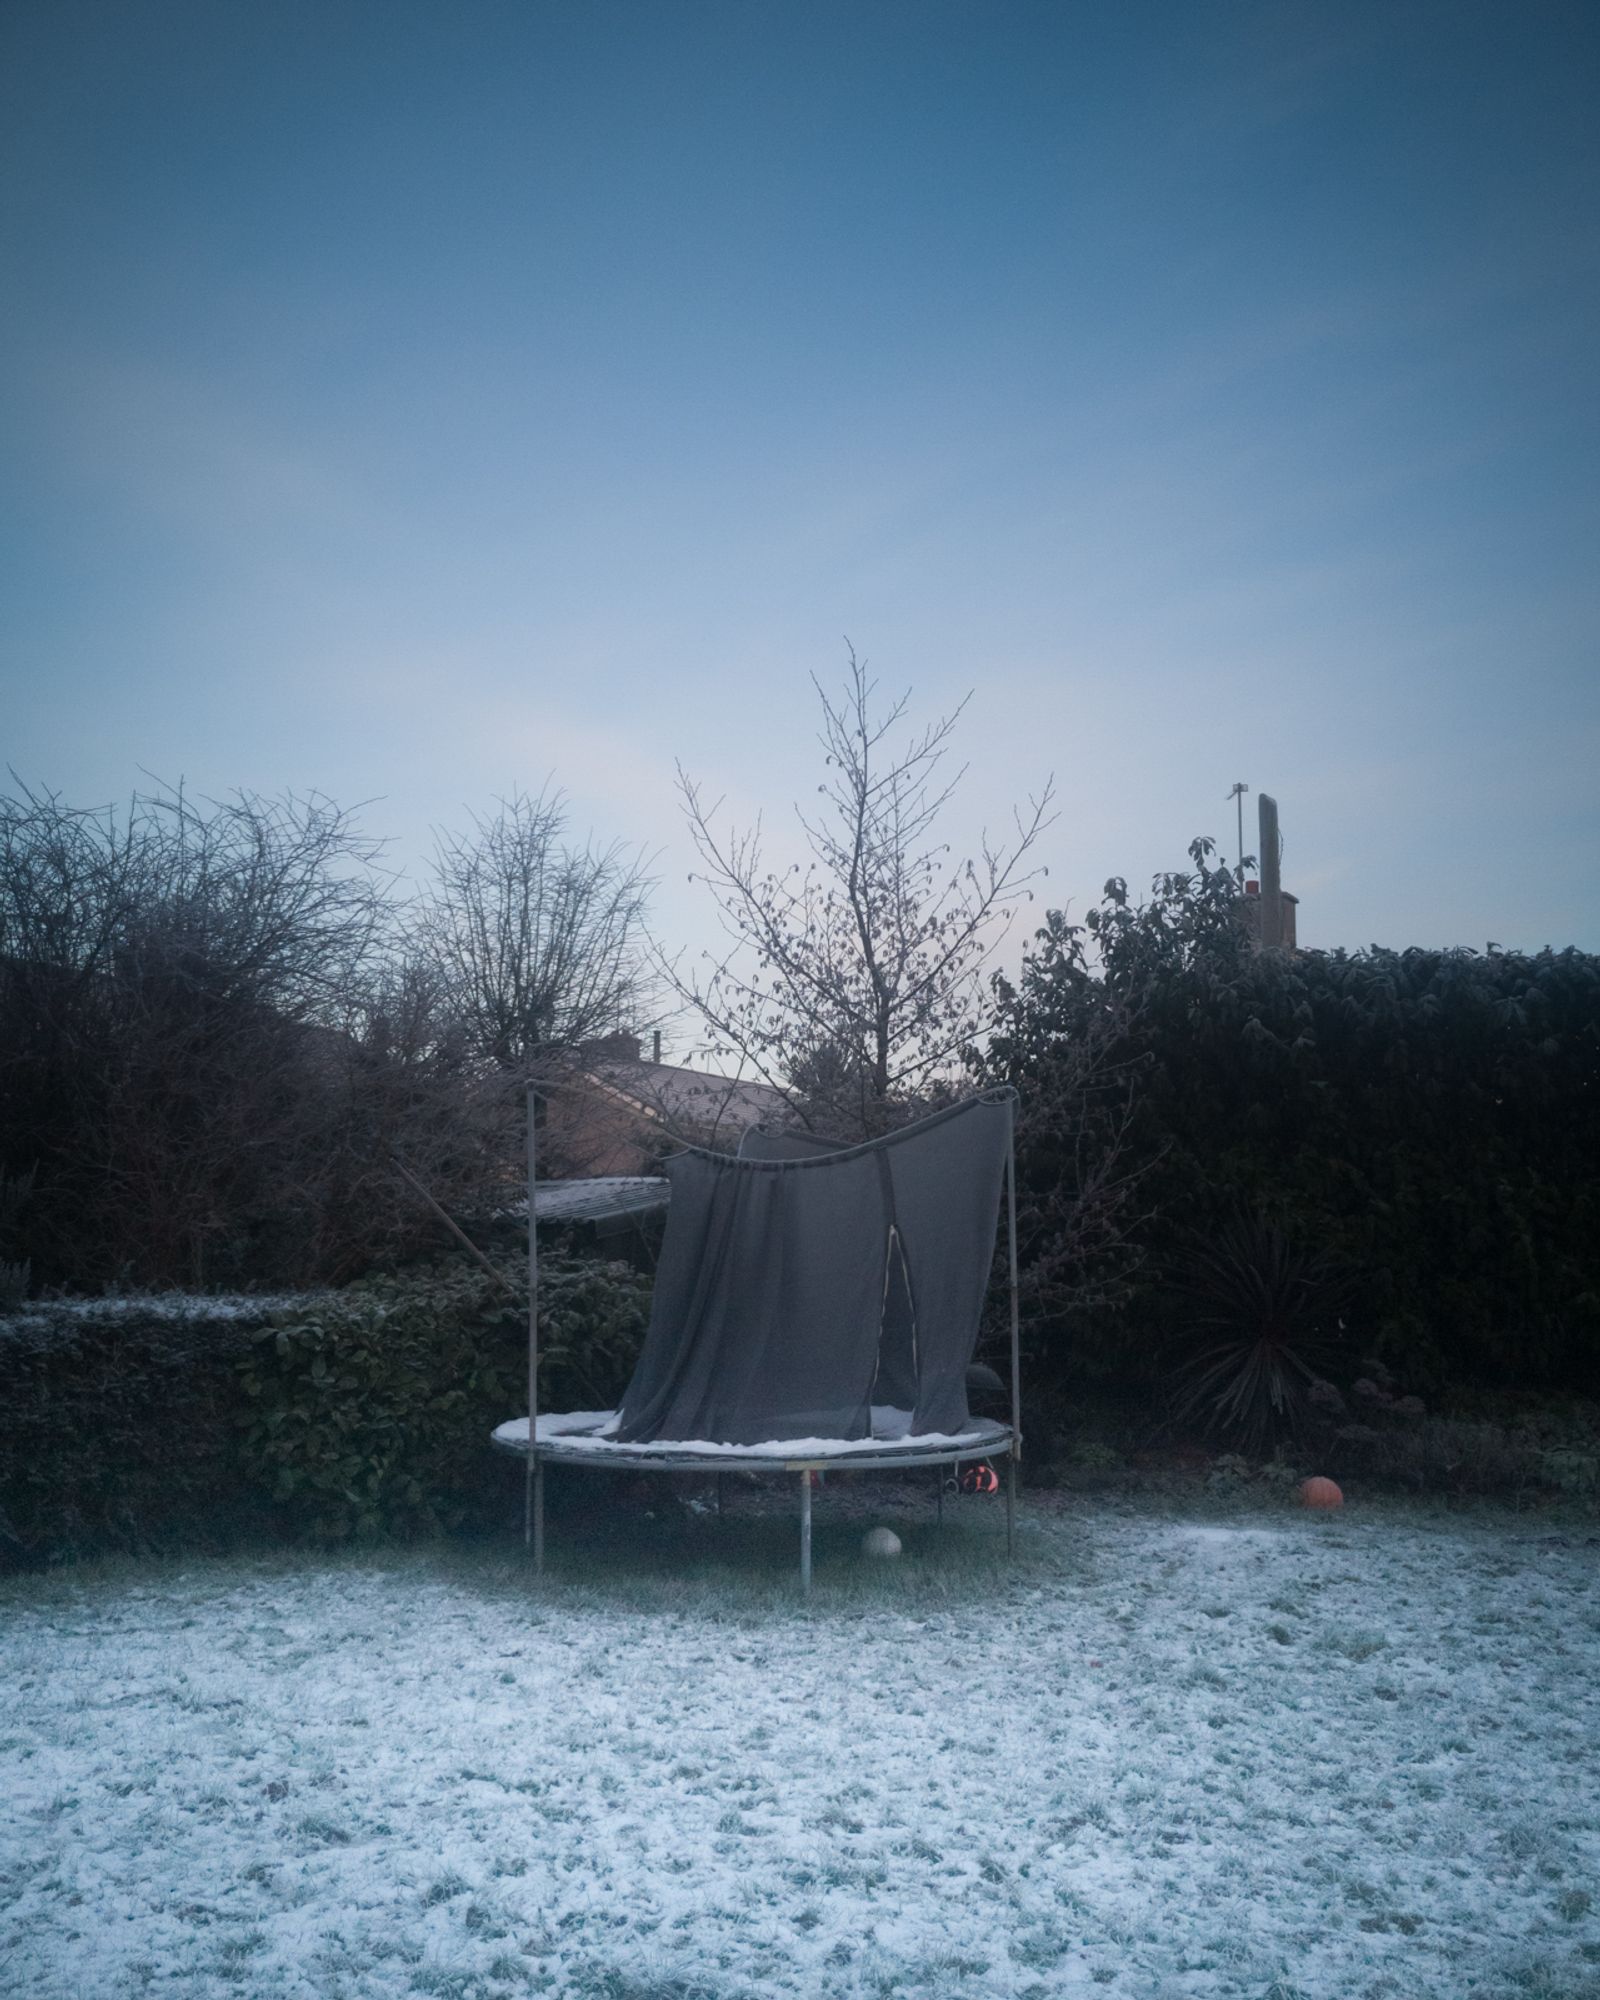 © Emma O'Brien - Image from the The Holding Place photography project